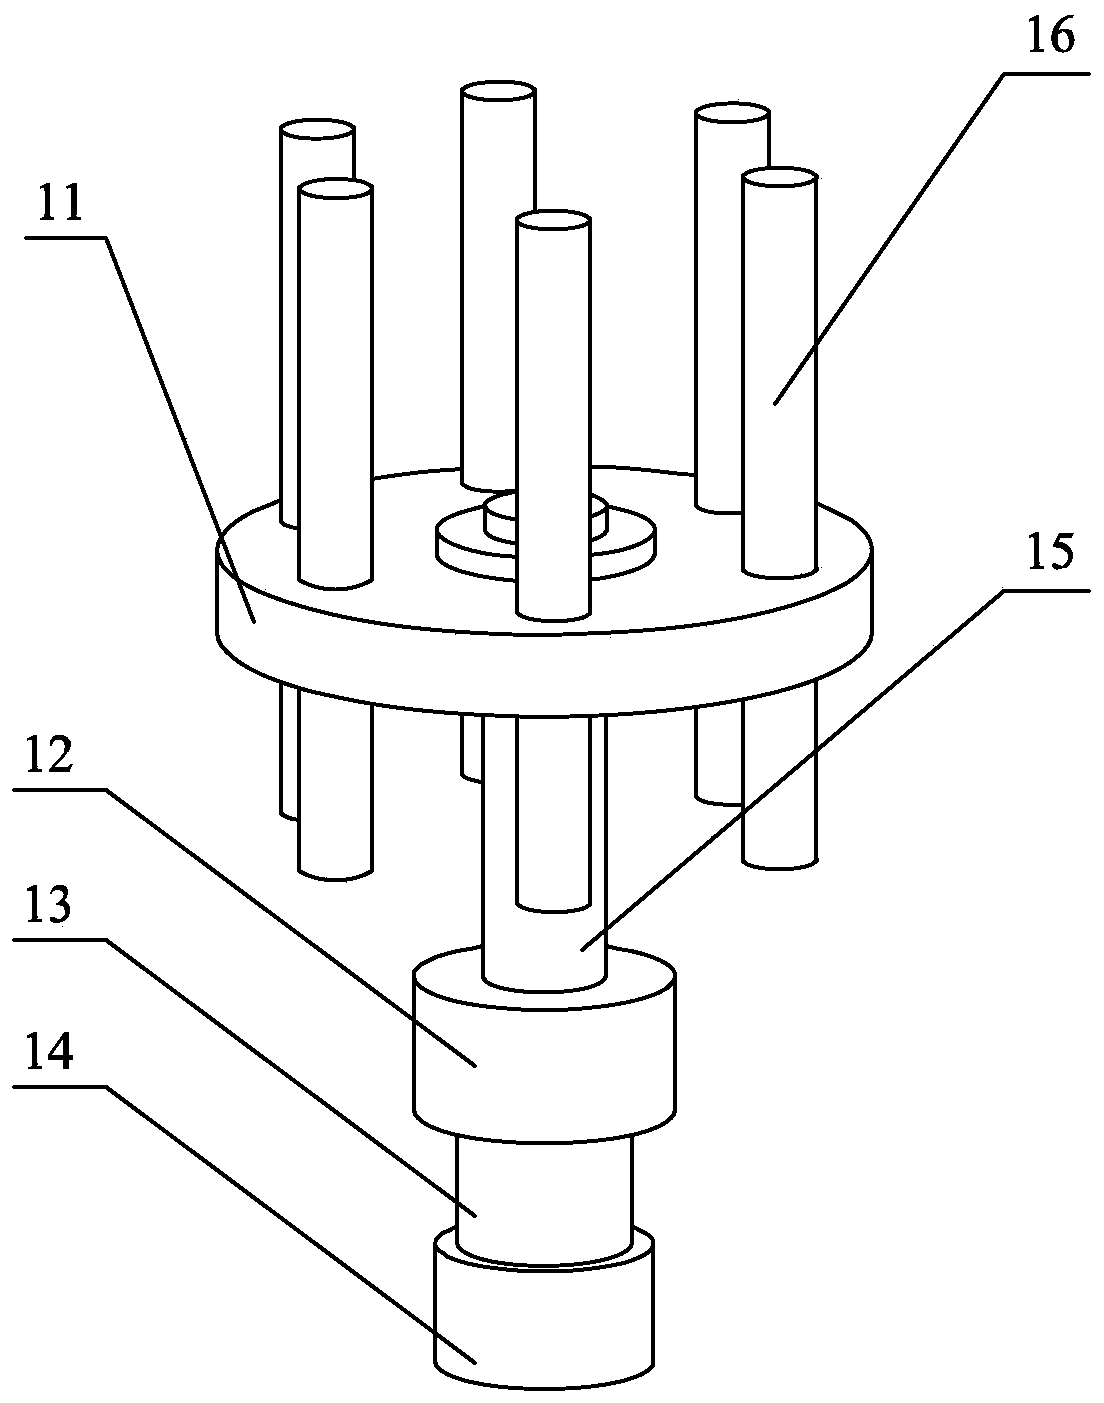 Distribution beam loading system for metal truss radome test and installation method